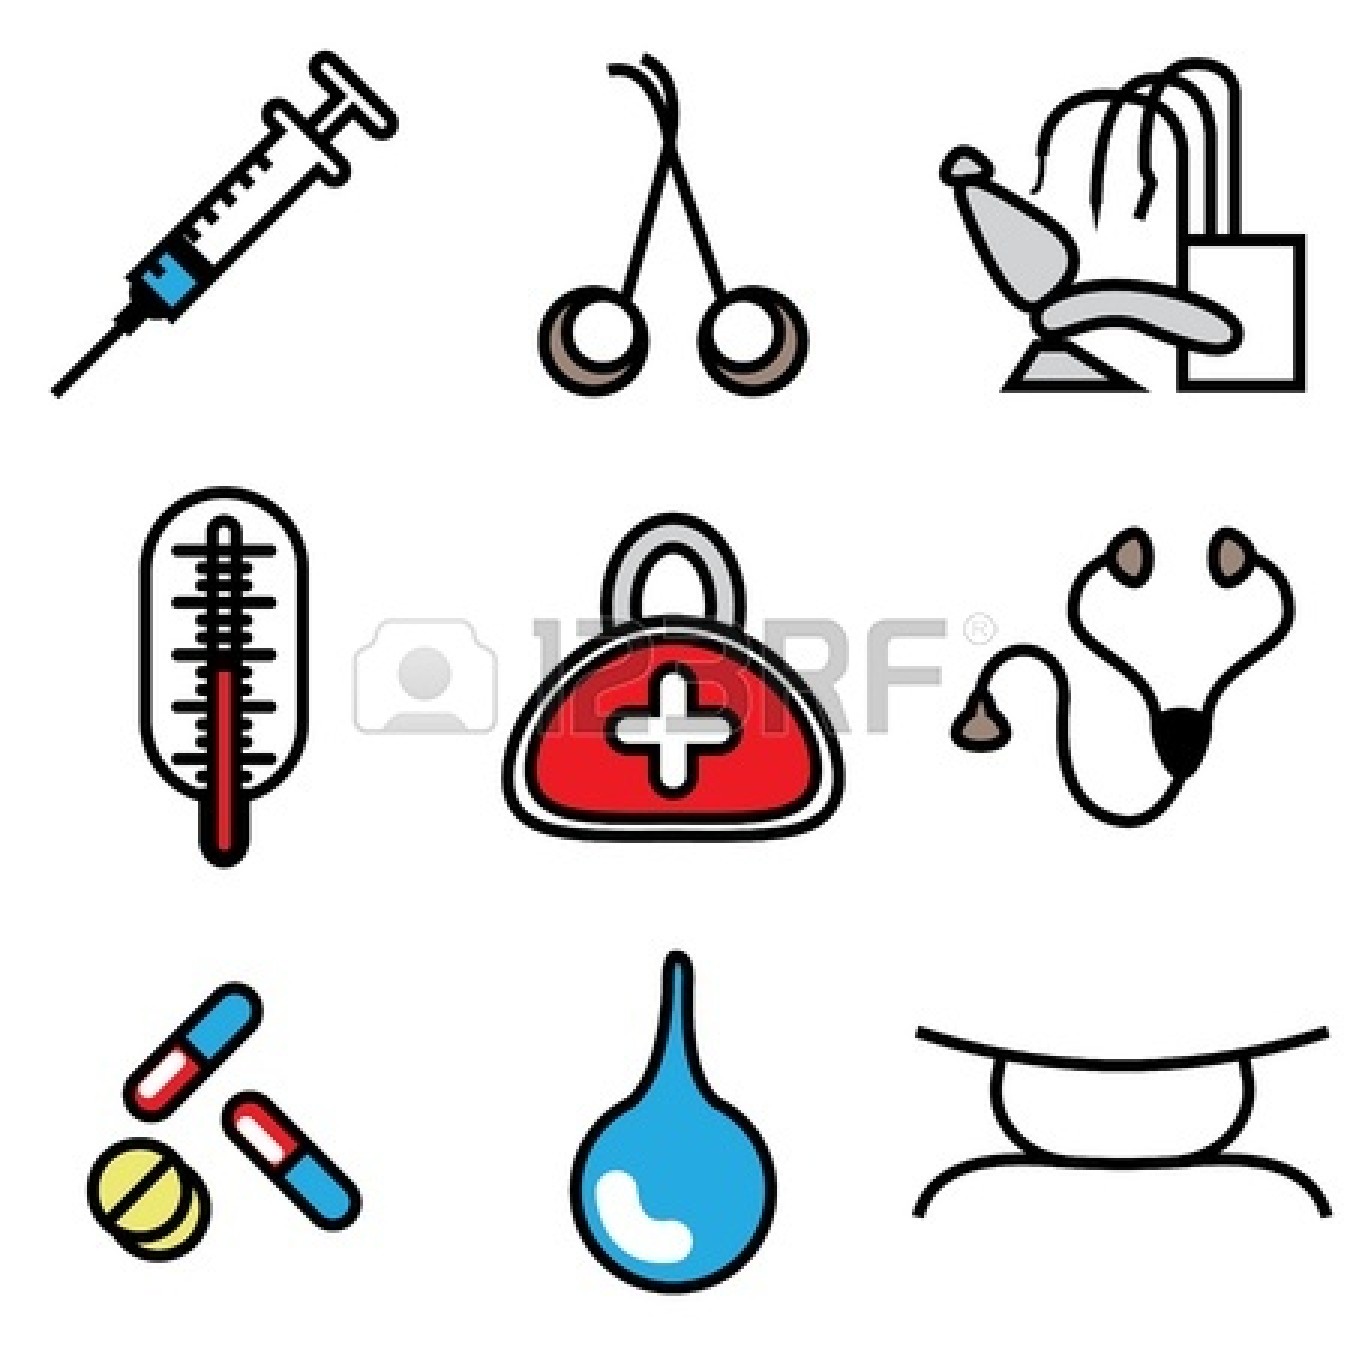 animated doctor tools